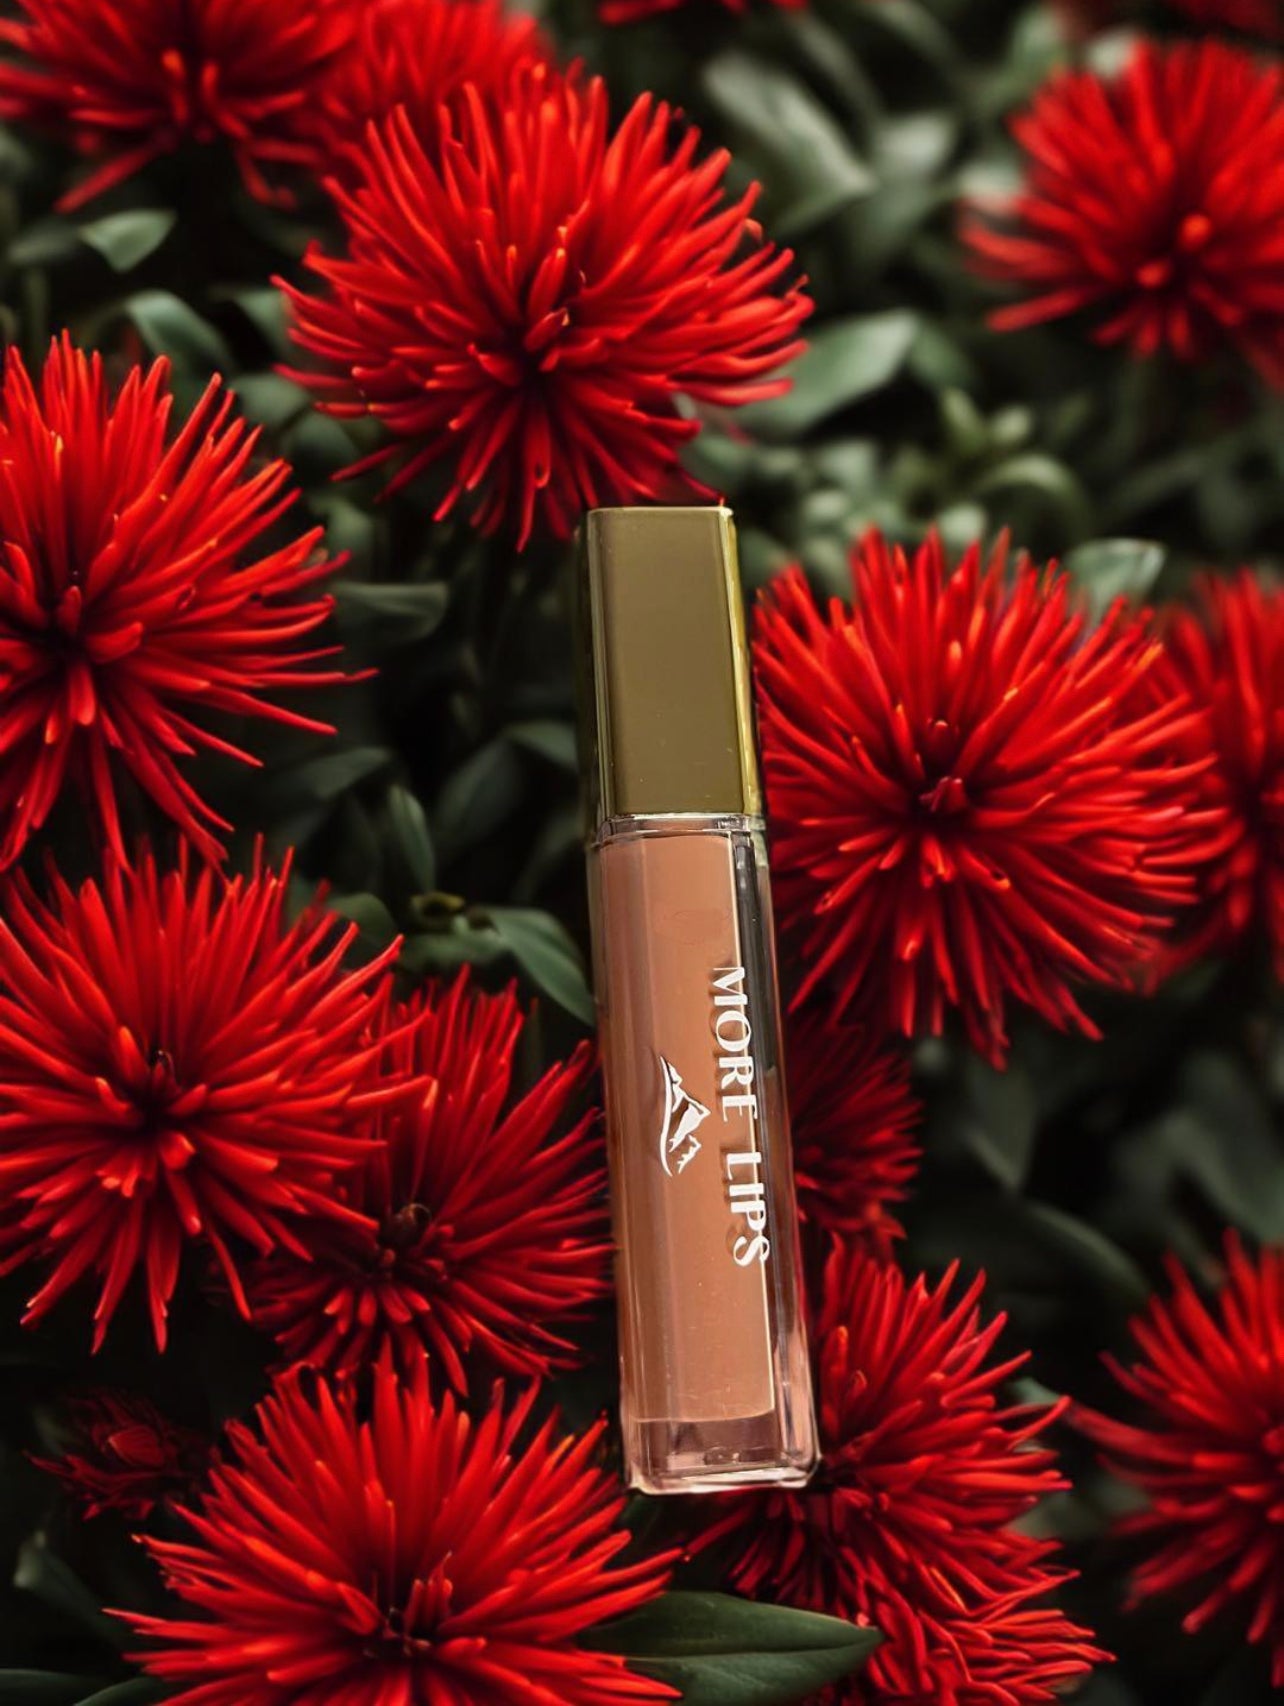 High-Shine Vegan Lip Gloss in Nude Shimmer, featuring a subtle shimmer and a natural nude color for an understated glam.